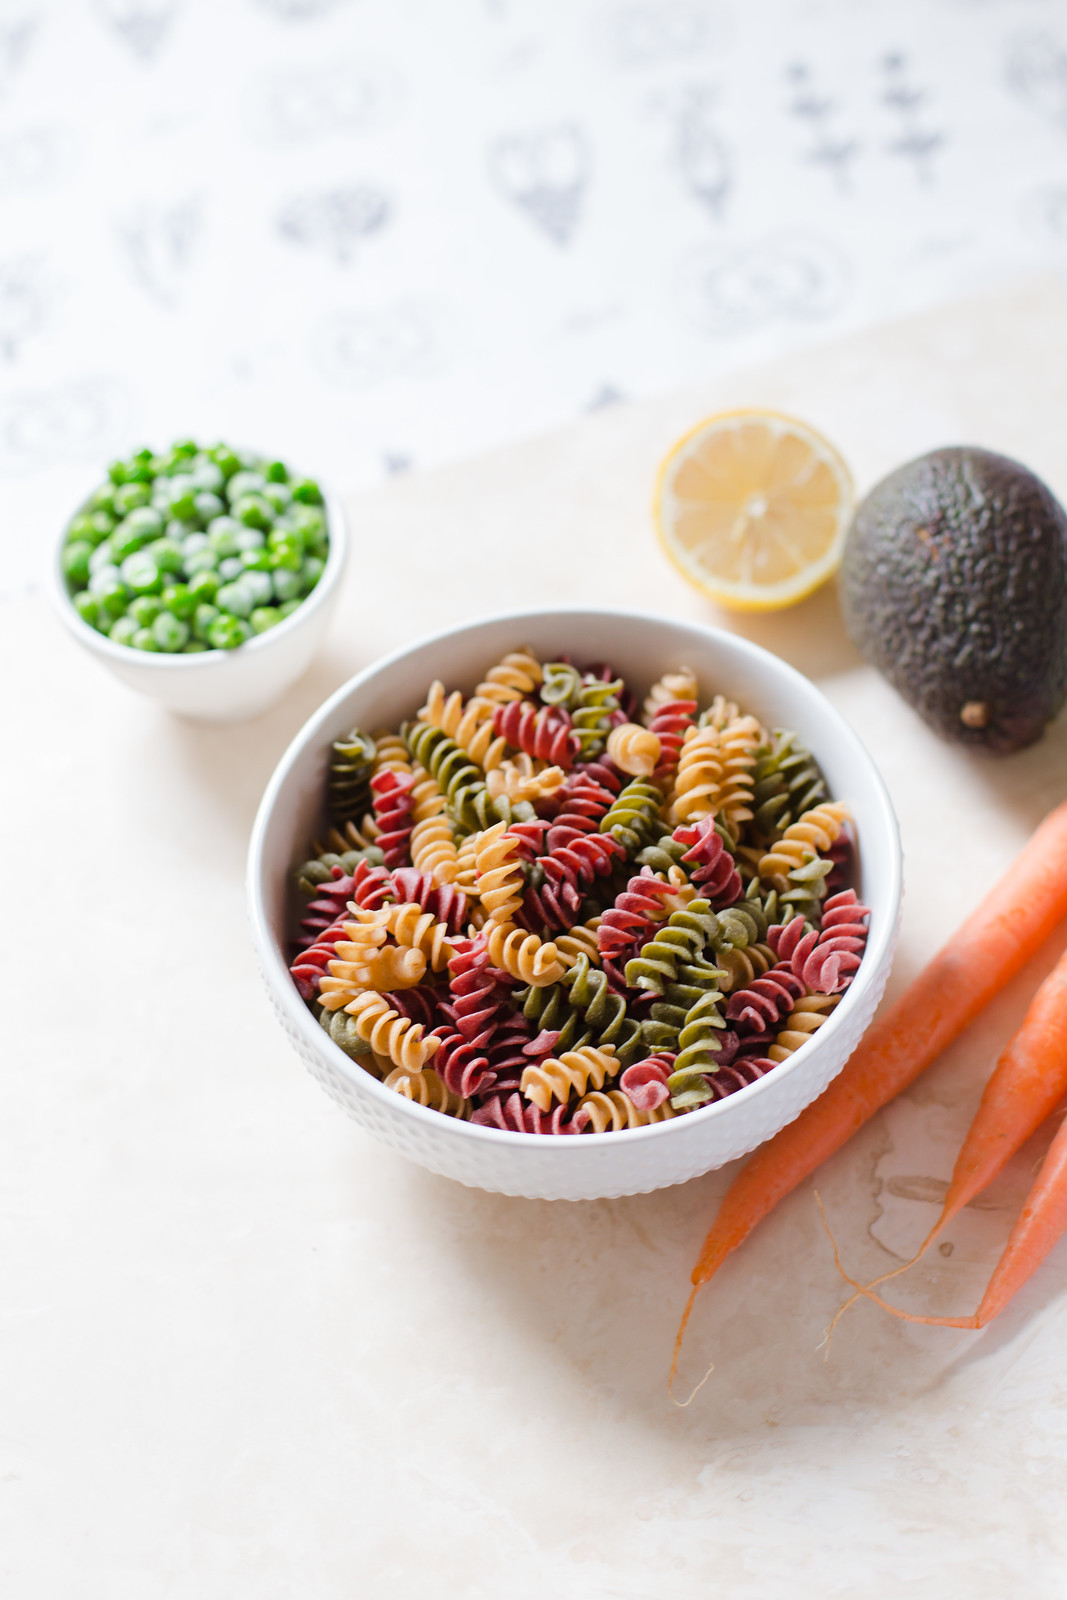 Pasta with Lentils and Vegetables